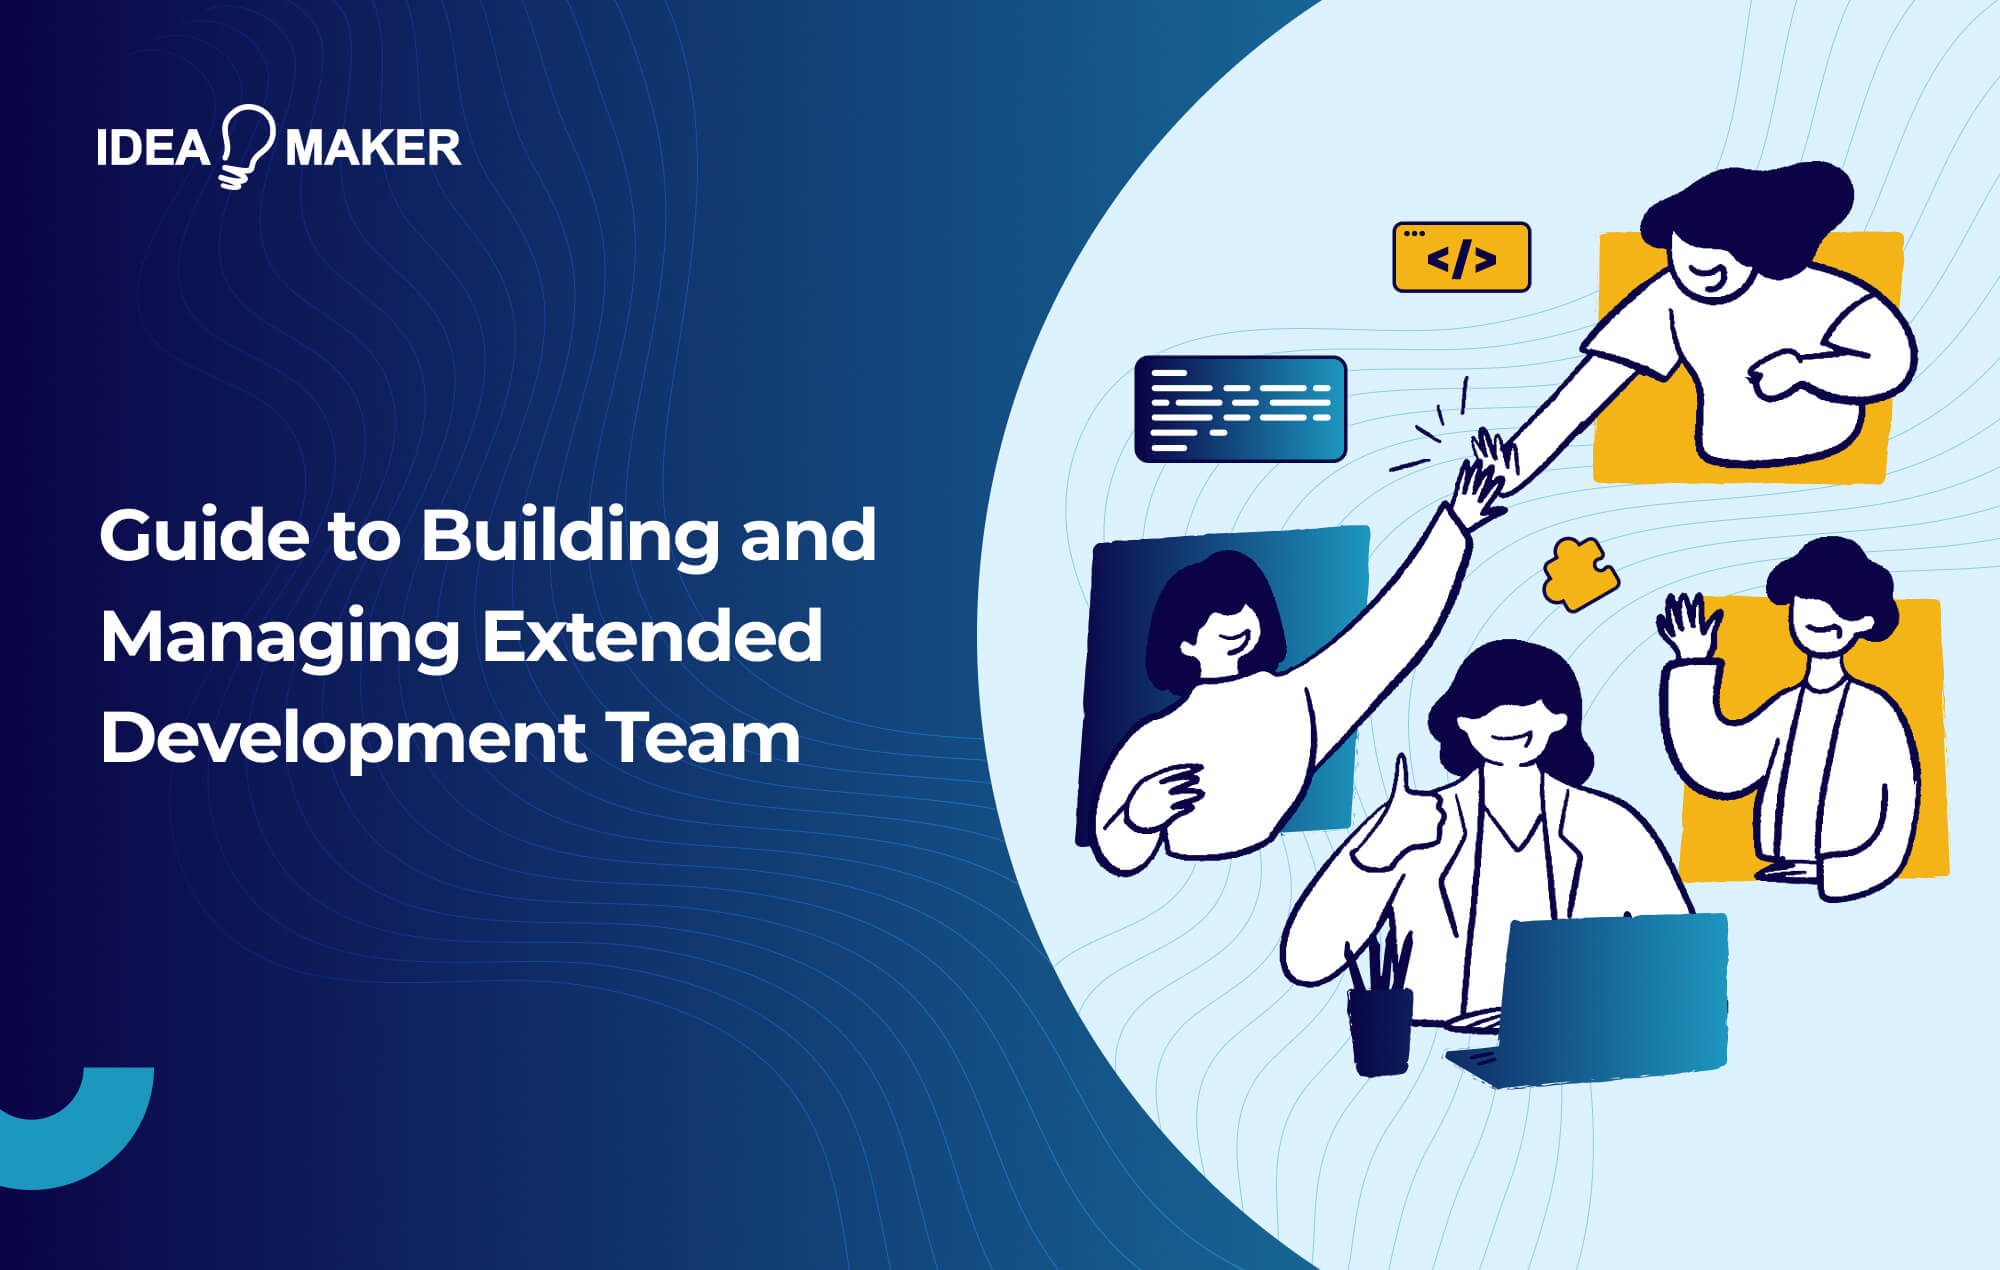 Ideamaker - Guide to Building and Managing Extended Development Team